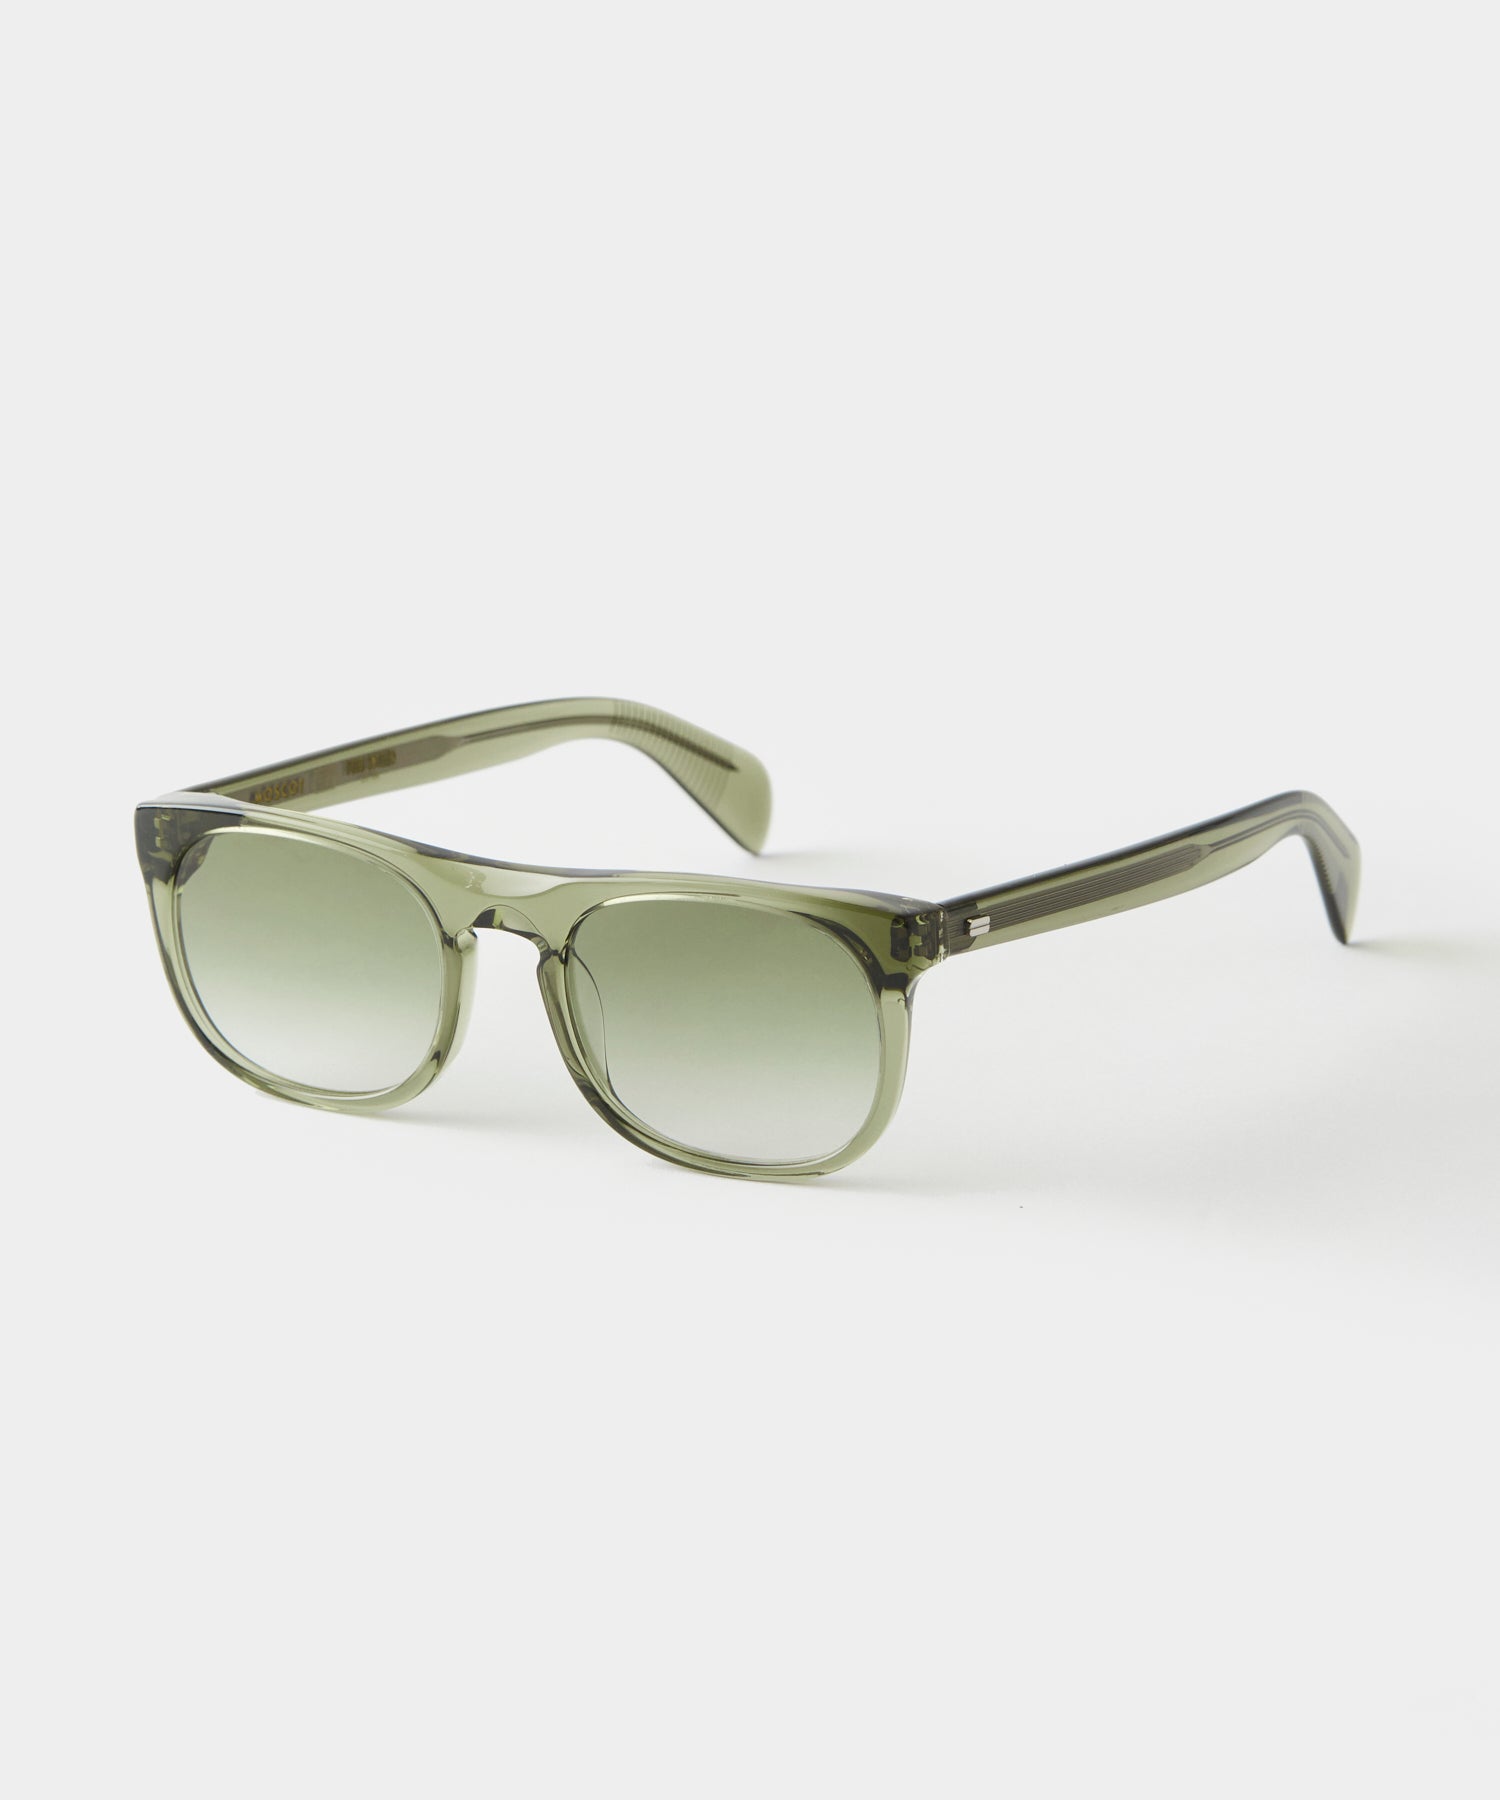 Todd Snyder x Moscot 10 Year Anniversary- The Nomad in Olive